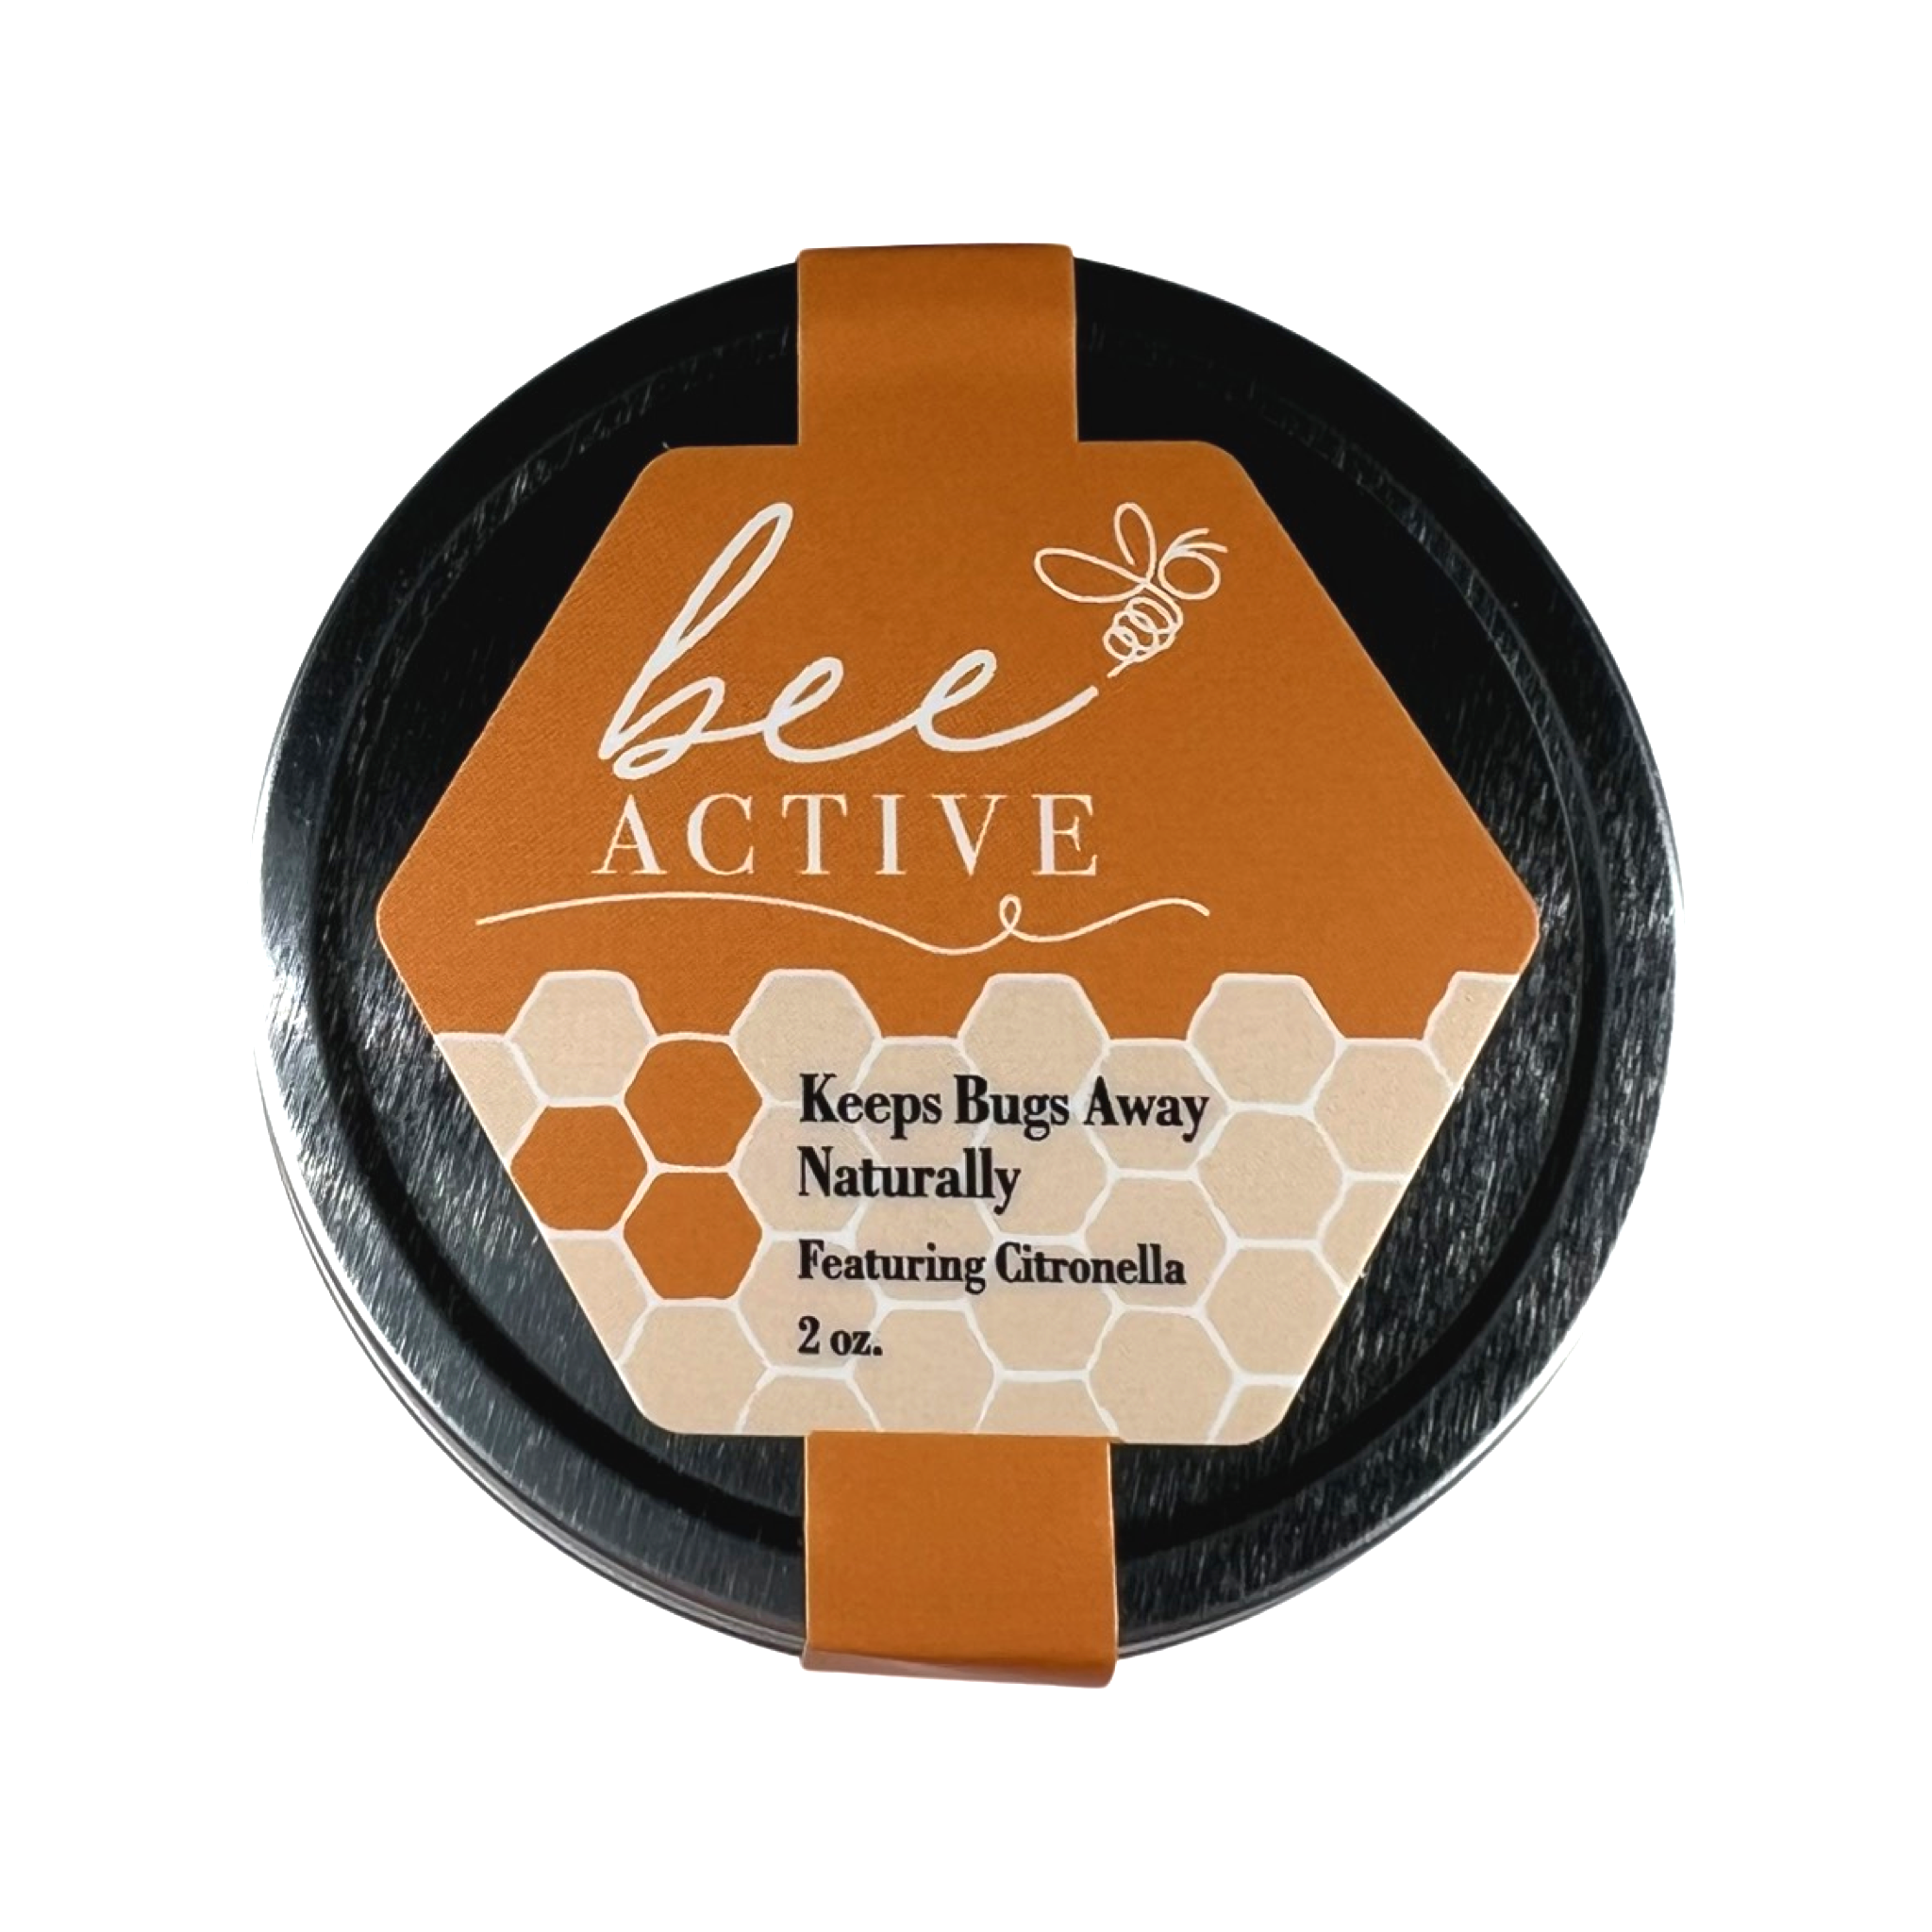 Bee Active (Protects Skin from Bugs!)